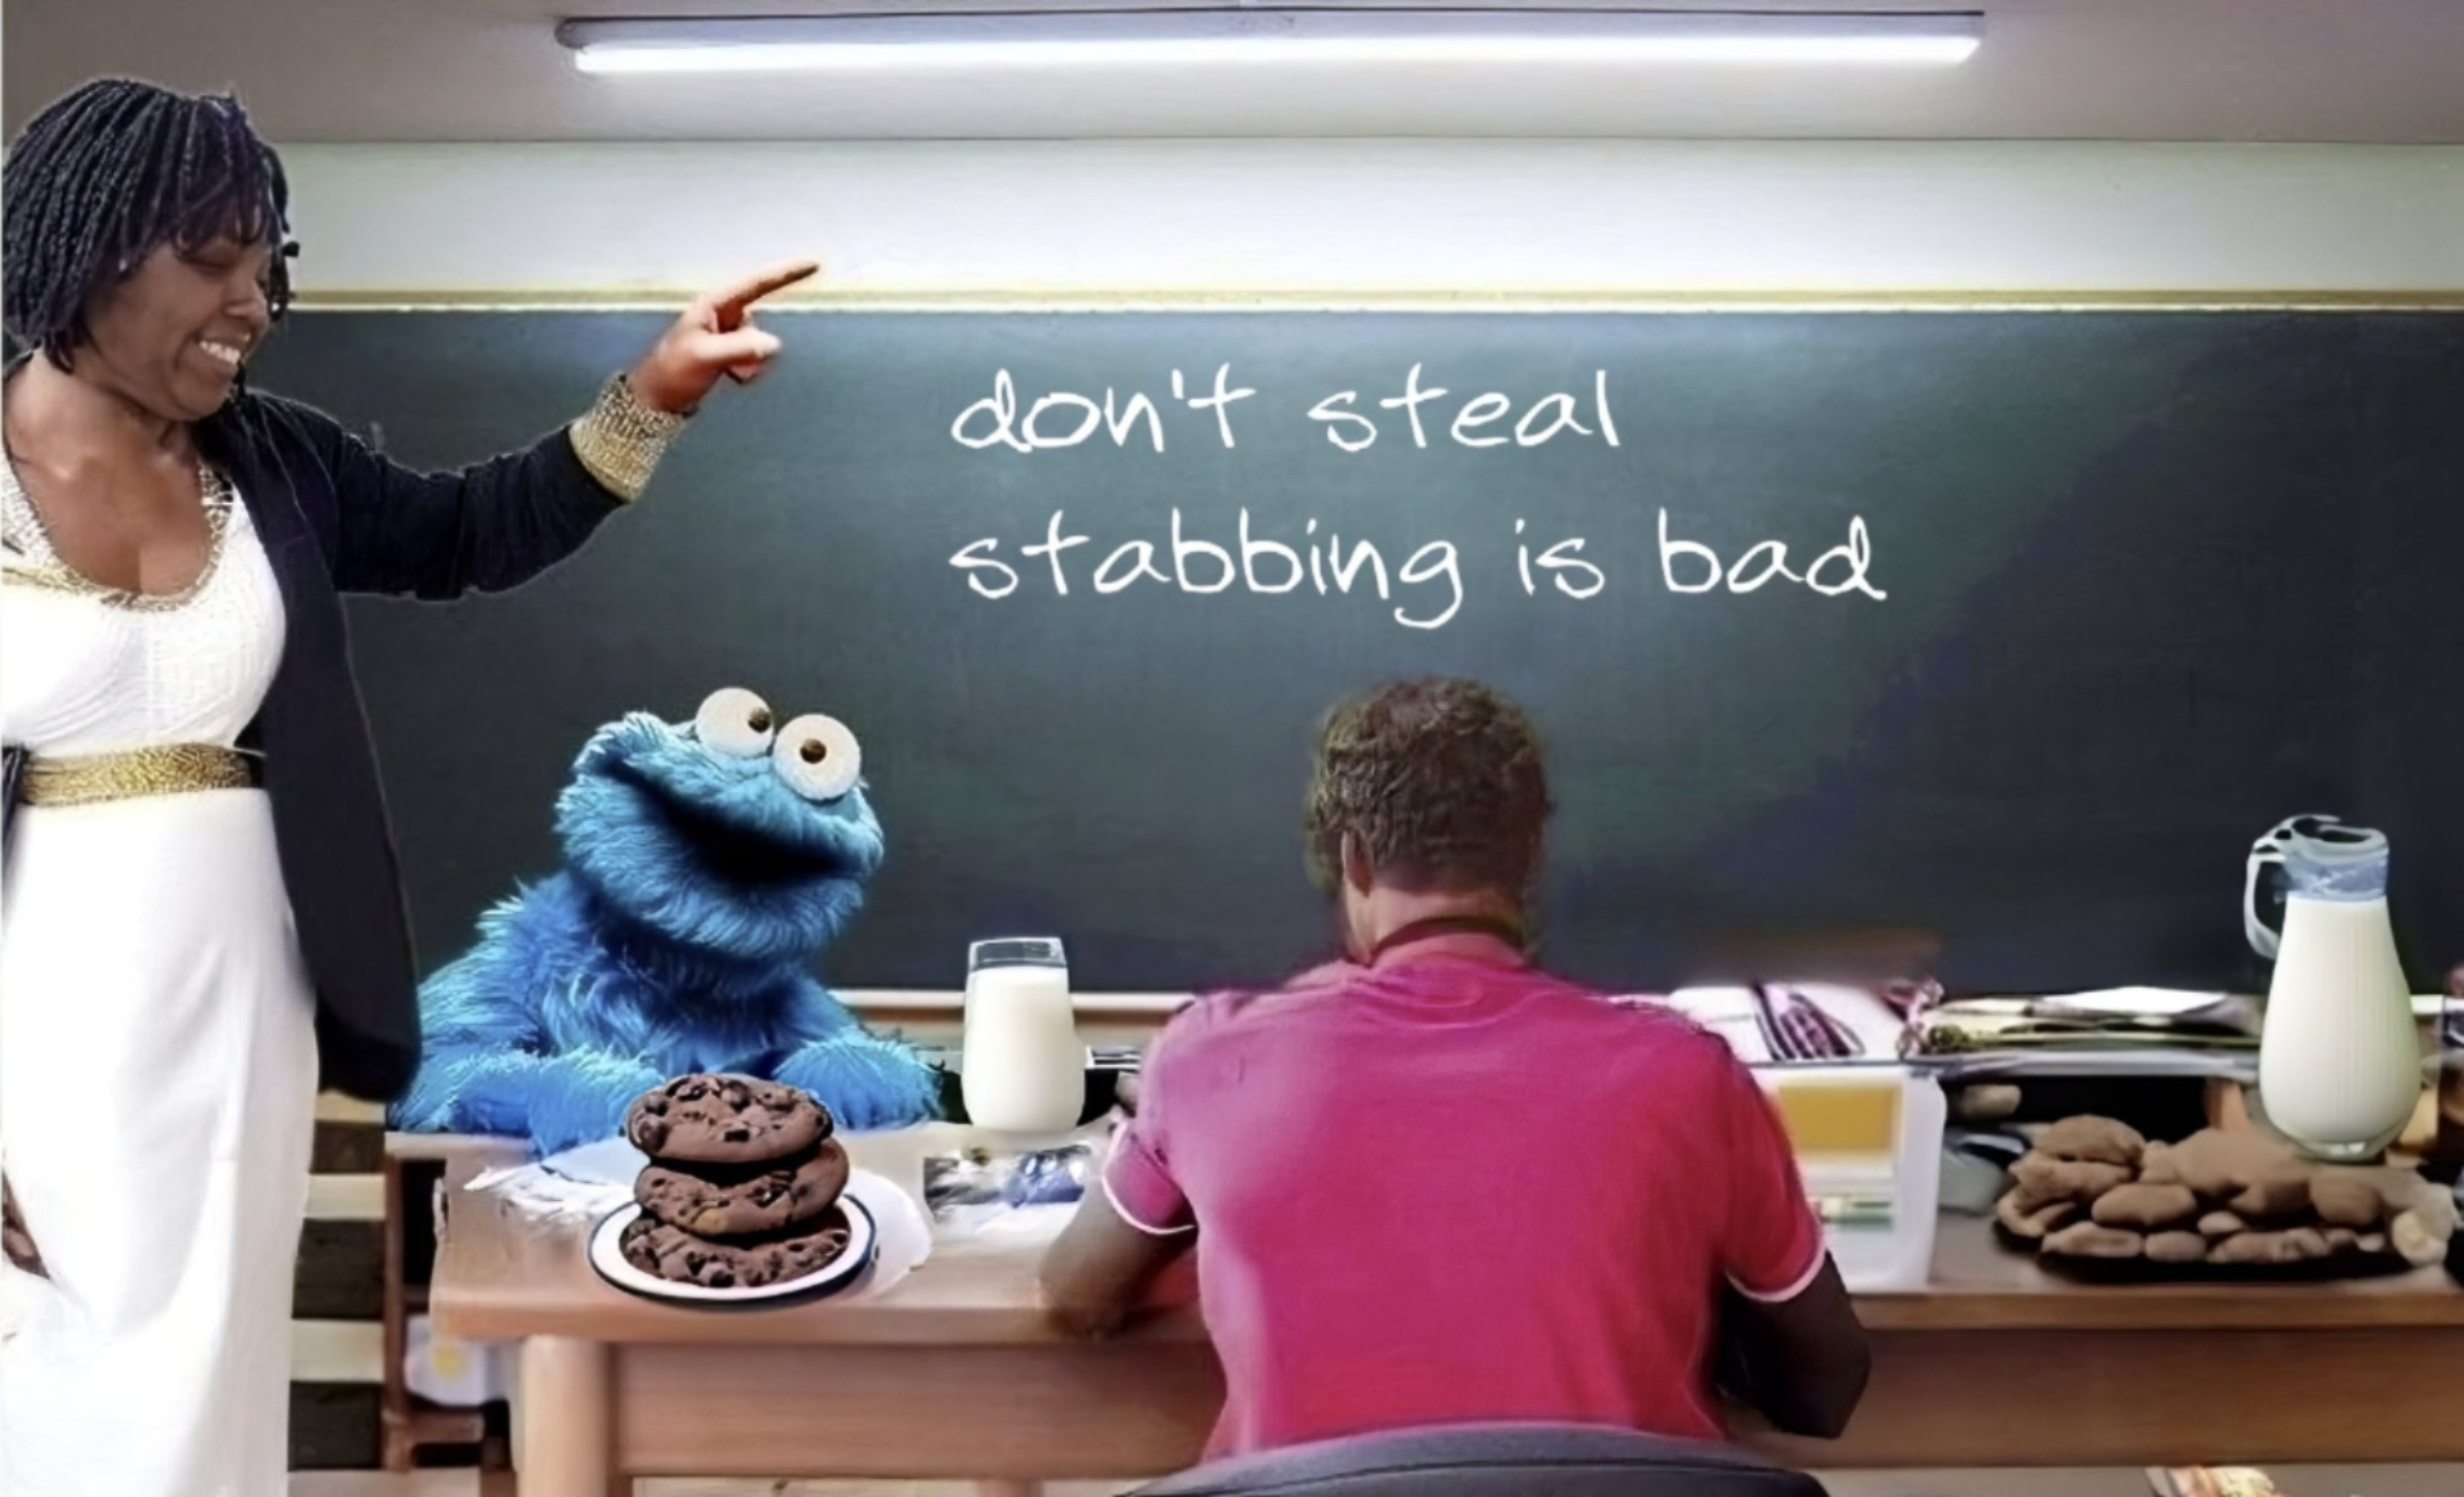 A classroom setting with a woman lecturing to Cookie Monster and a young man. A blackboard has "don't steal" and "stabbing is bad" on it.